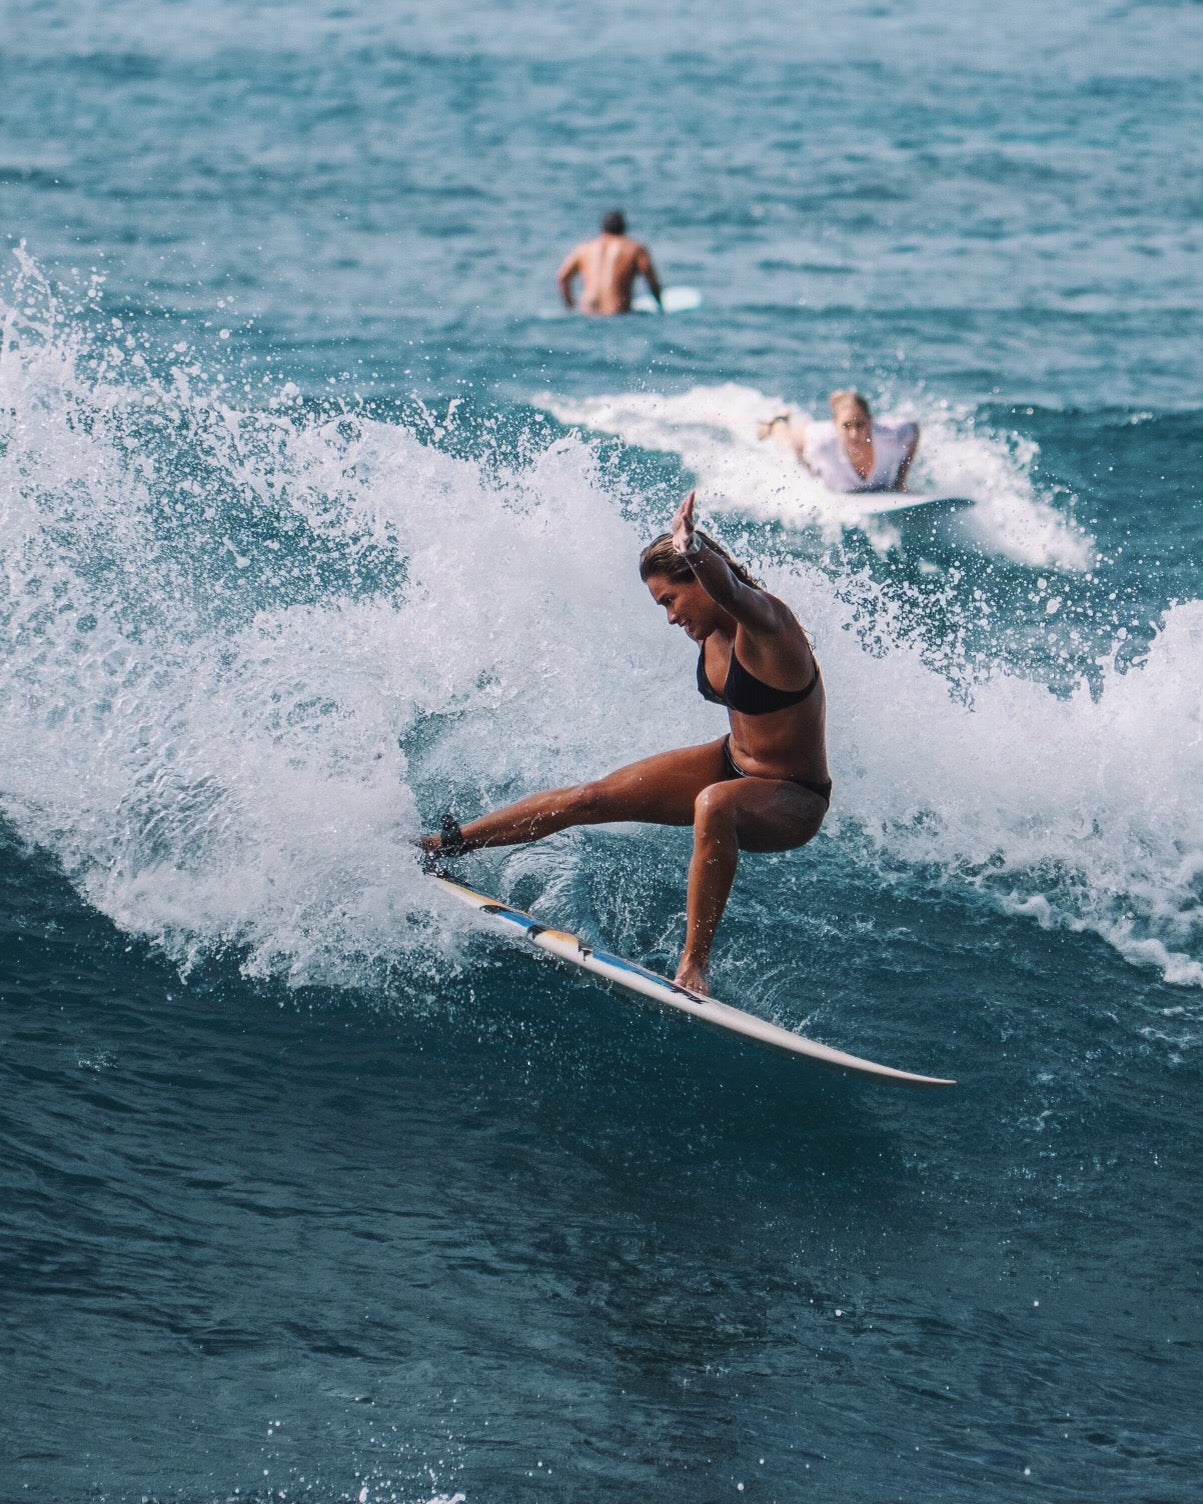 This Hawaii surfer is making waves for plus-size women